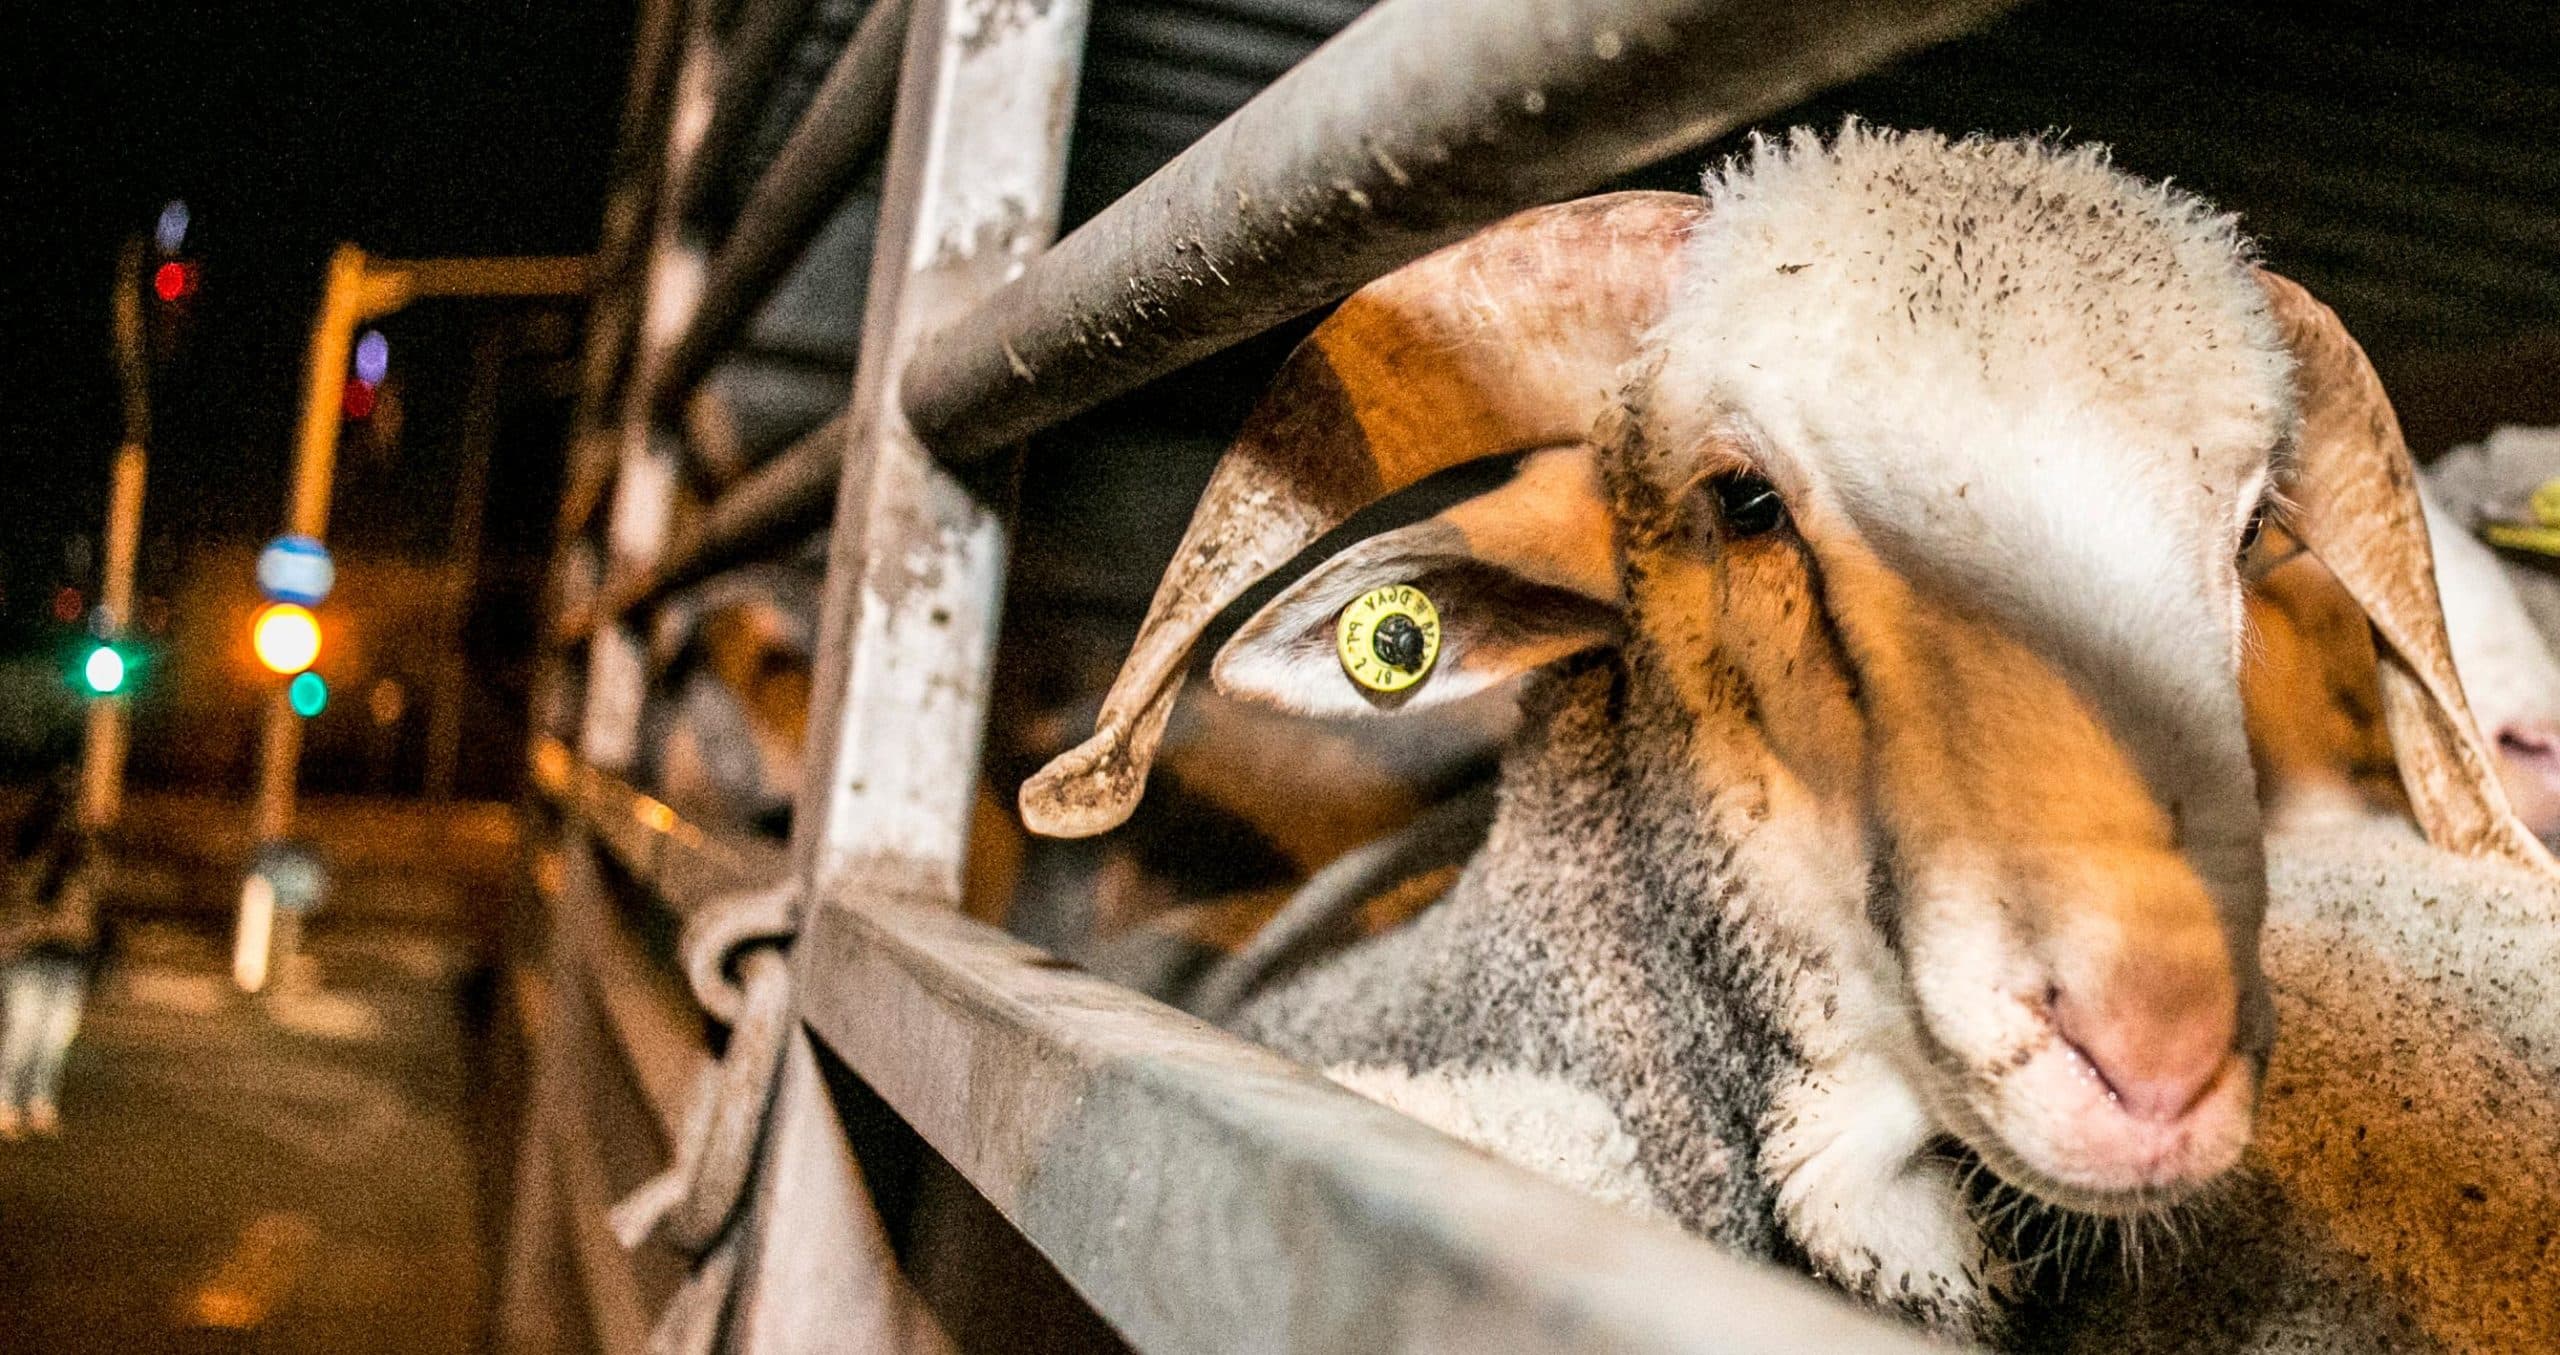 Help end live animal exports